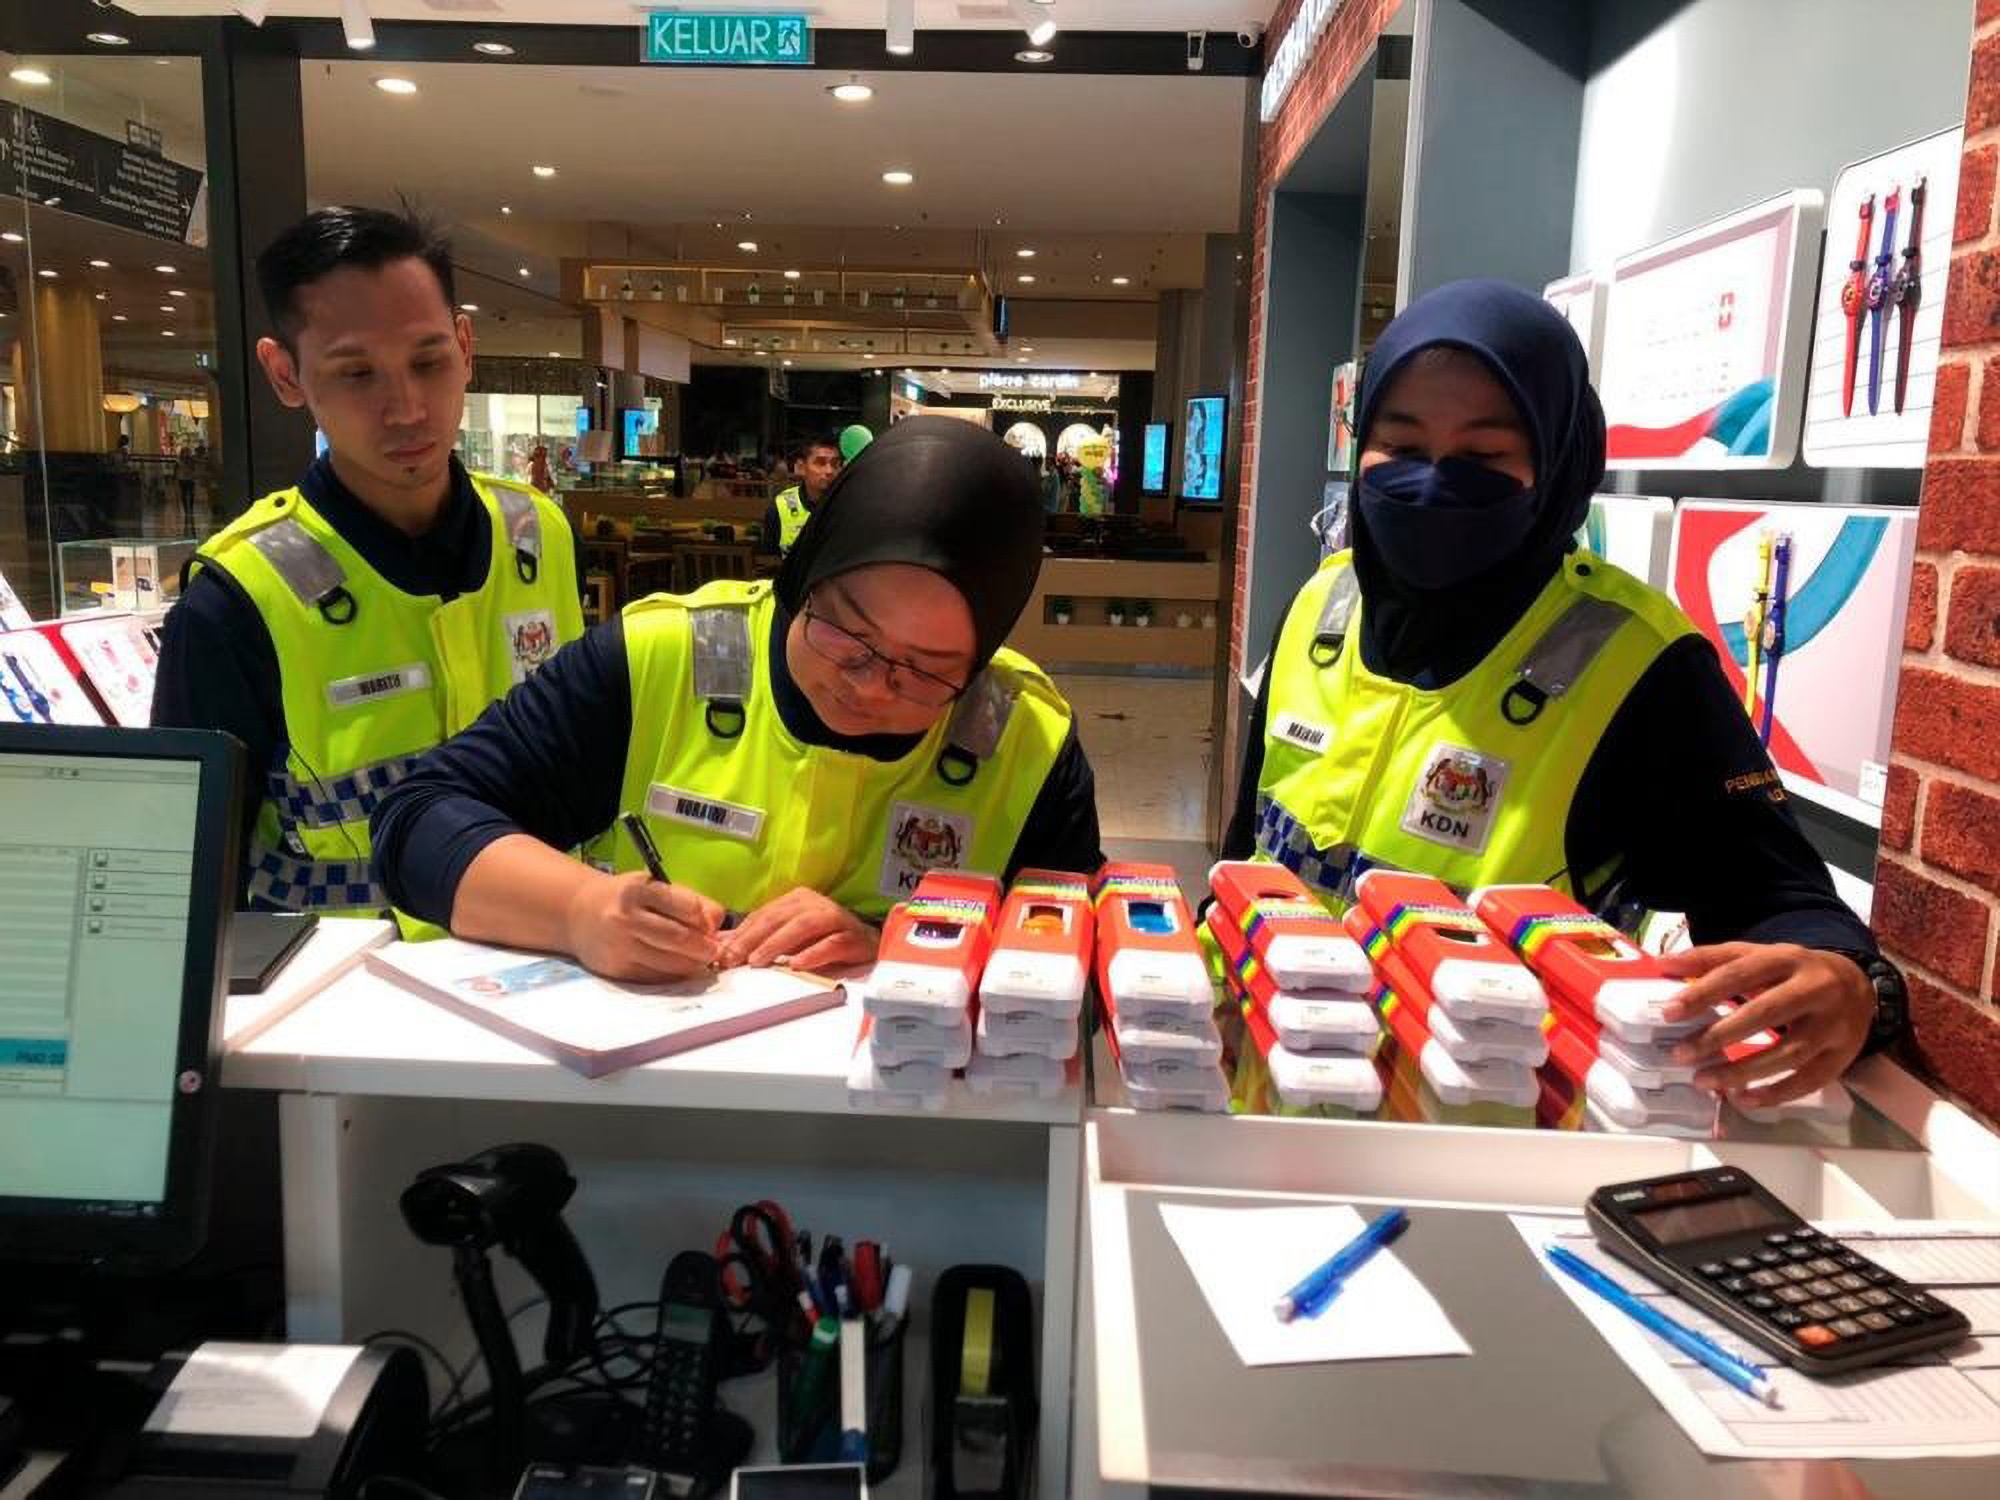 Malaysian Authorities Will Not Return Swatch’s Seized ‘Pride Collection’, Stores To Restock Rainbow Watches